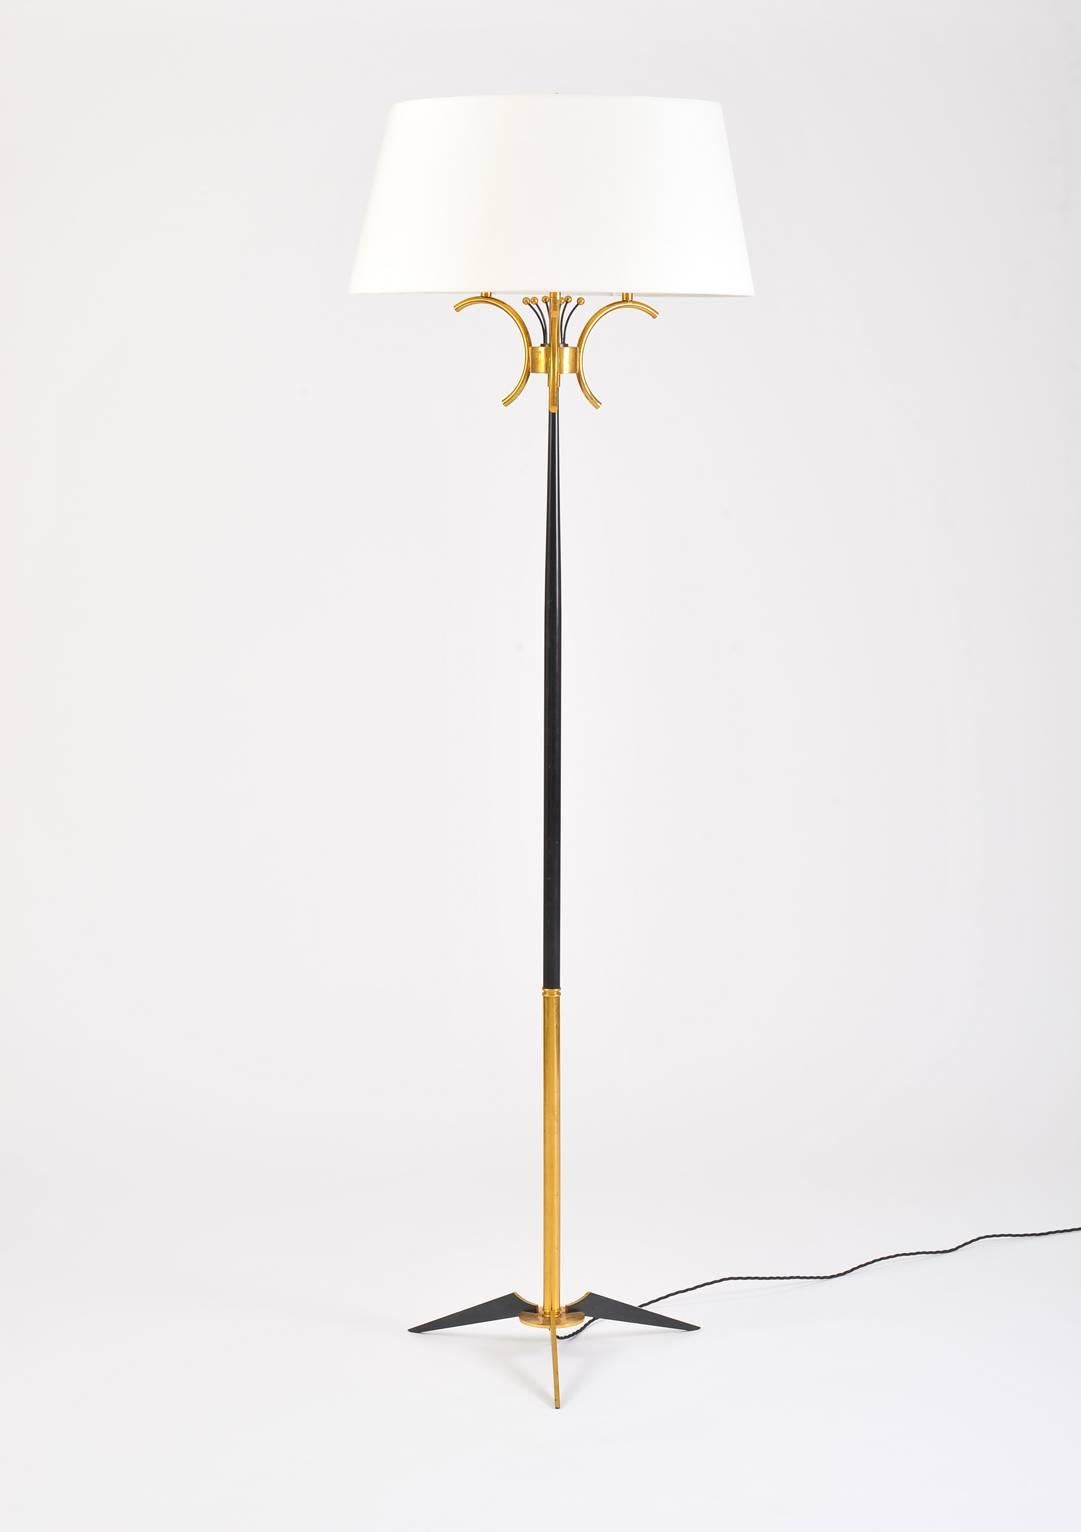 A brass and black enameled iron floor lamp the tapered stem on a shaped tripod base, holding three lights adorned with pistil-like elements, the original shade recovered in a new ivory material, topped by brass finial.
France, circa 1950.